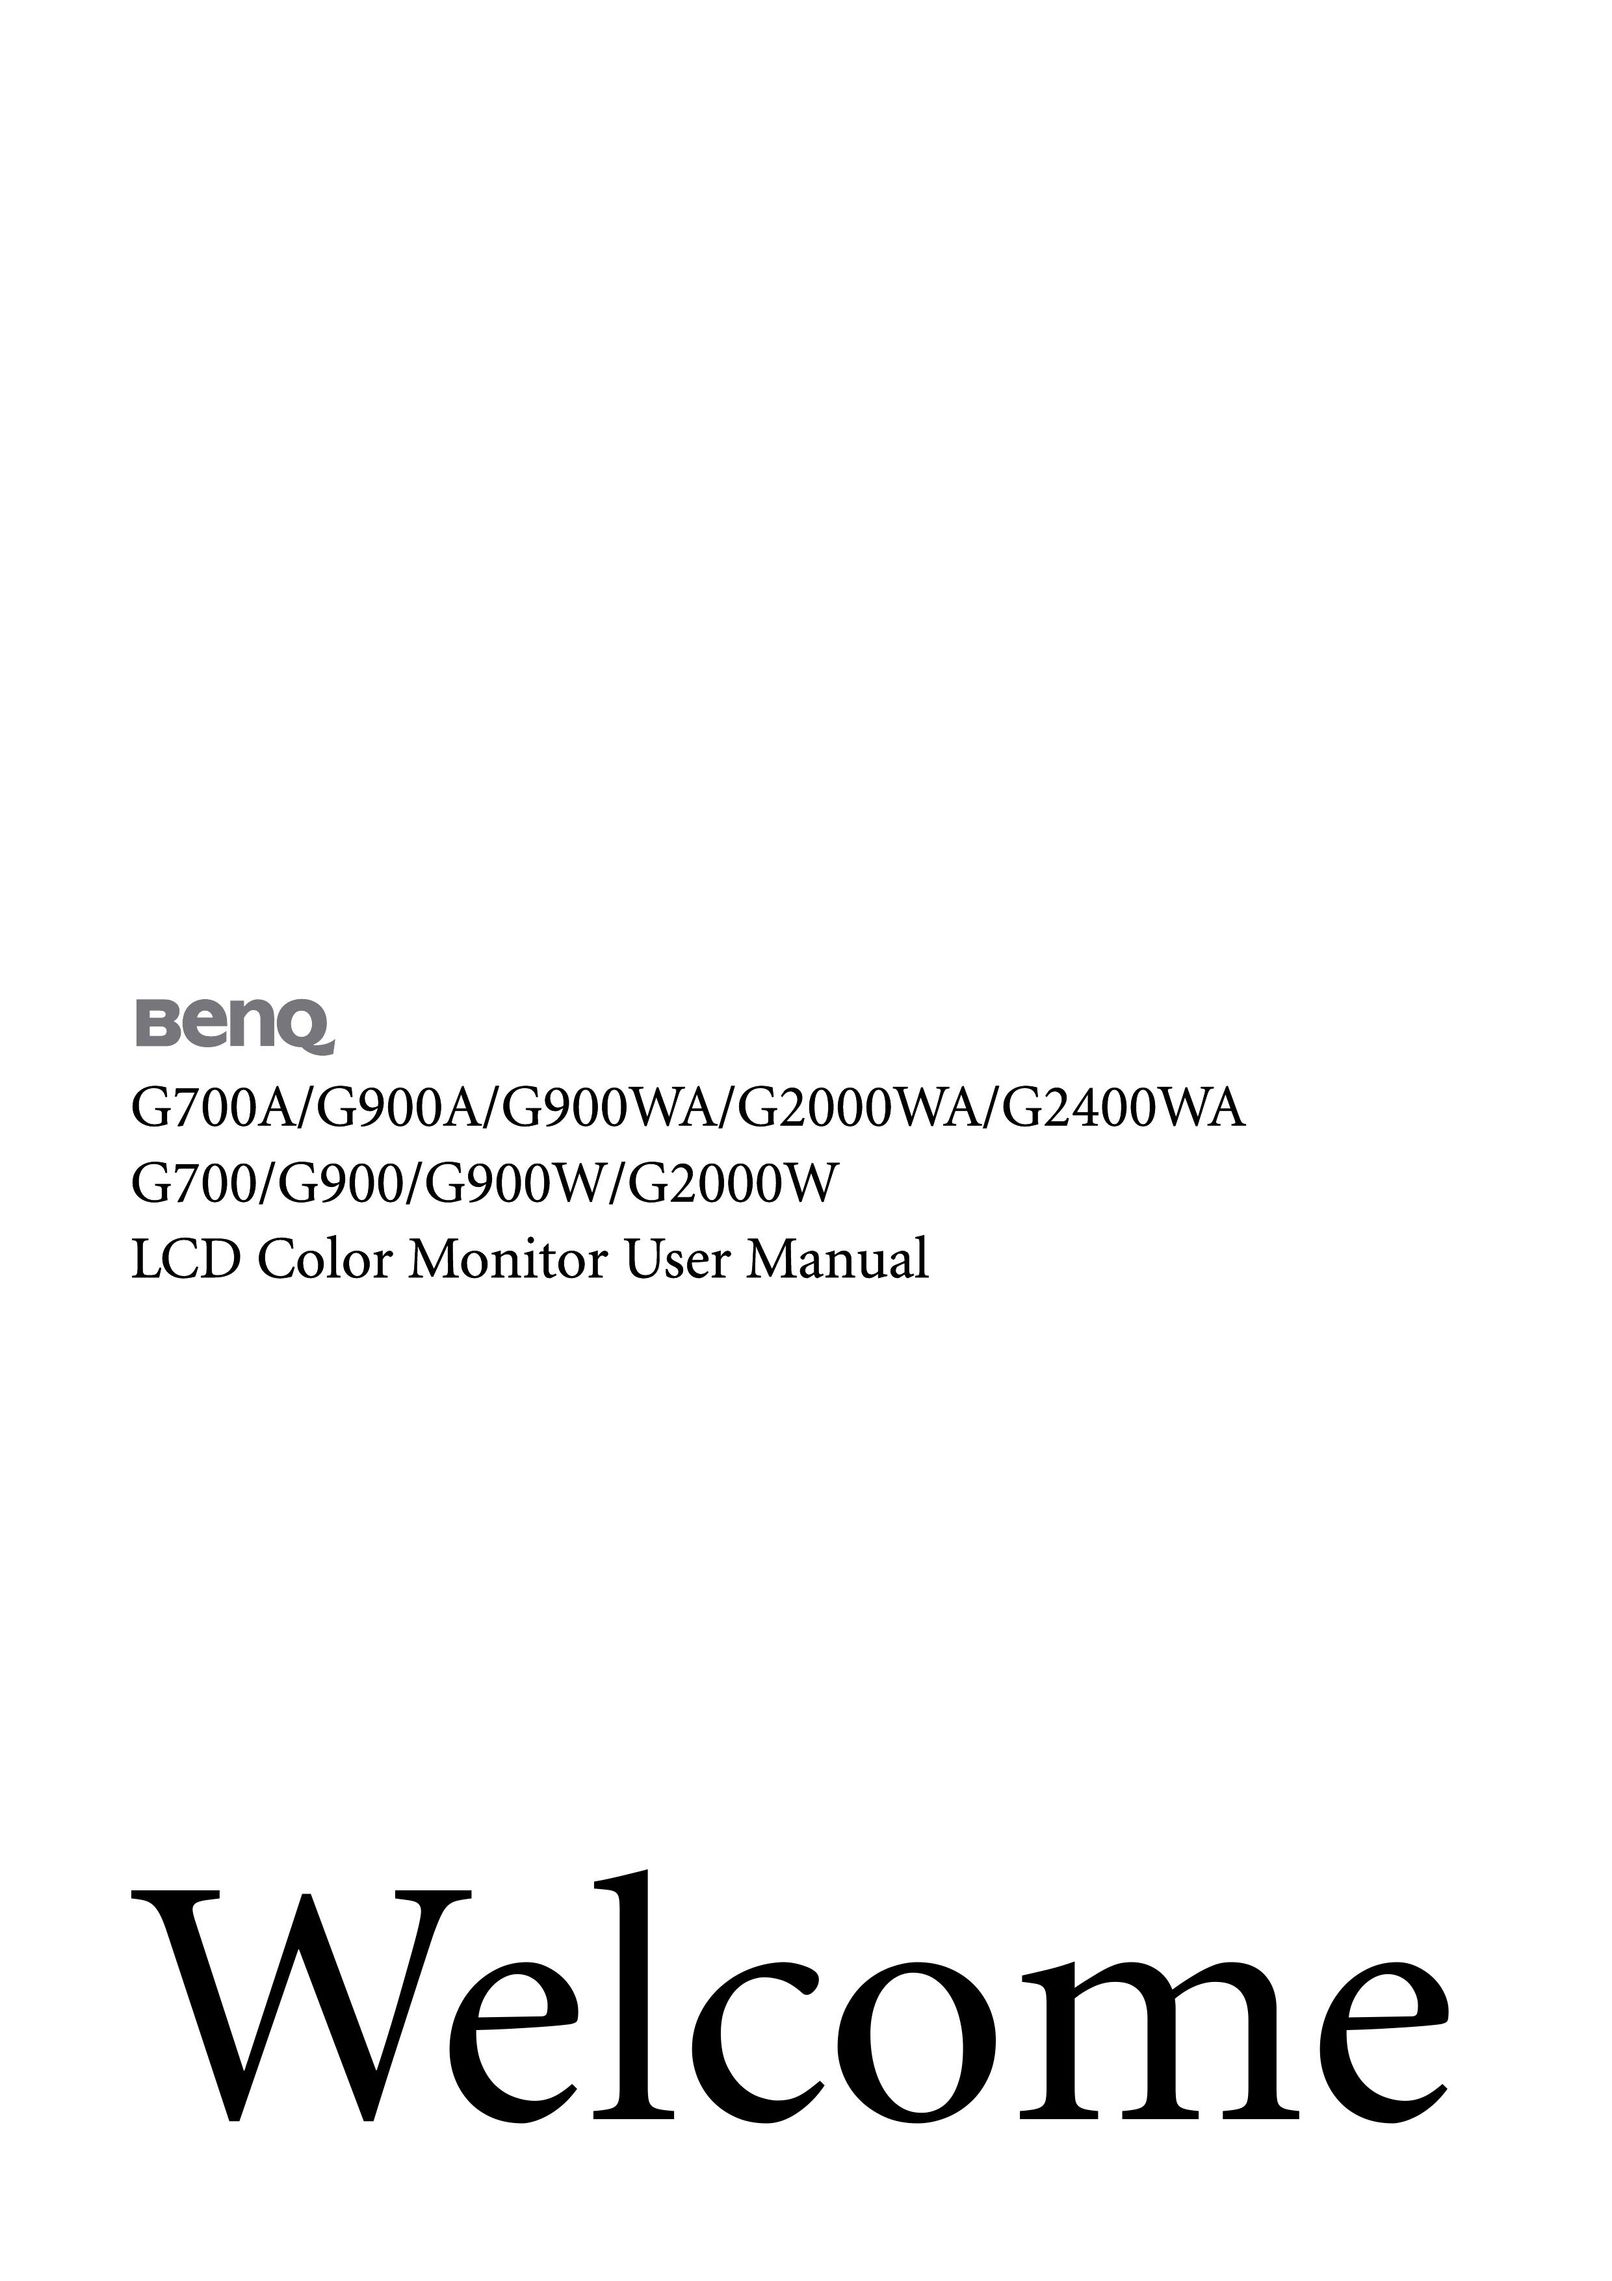 BenQ G900A Car Video System User Manual (Page 1)